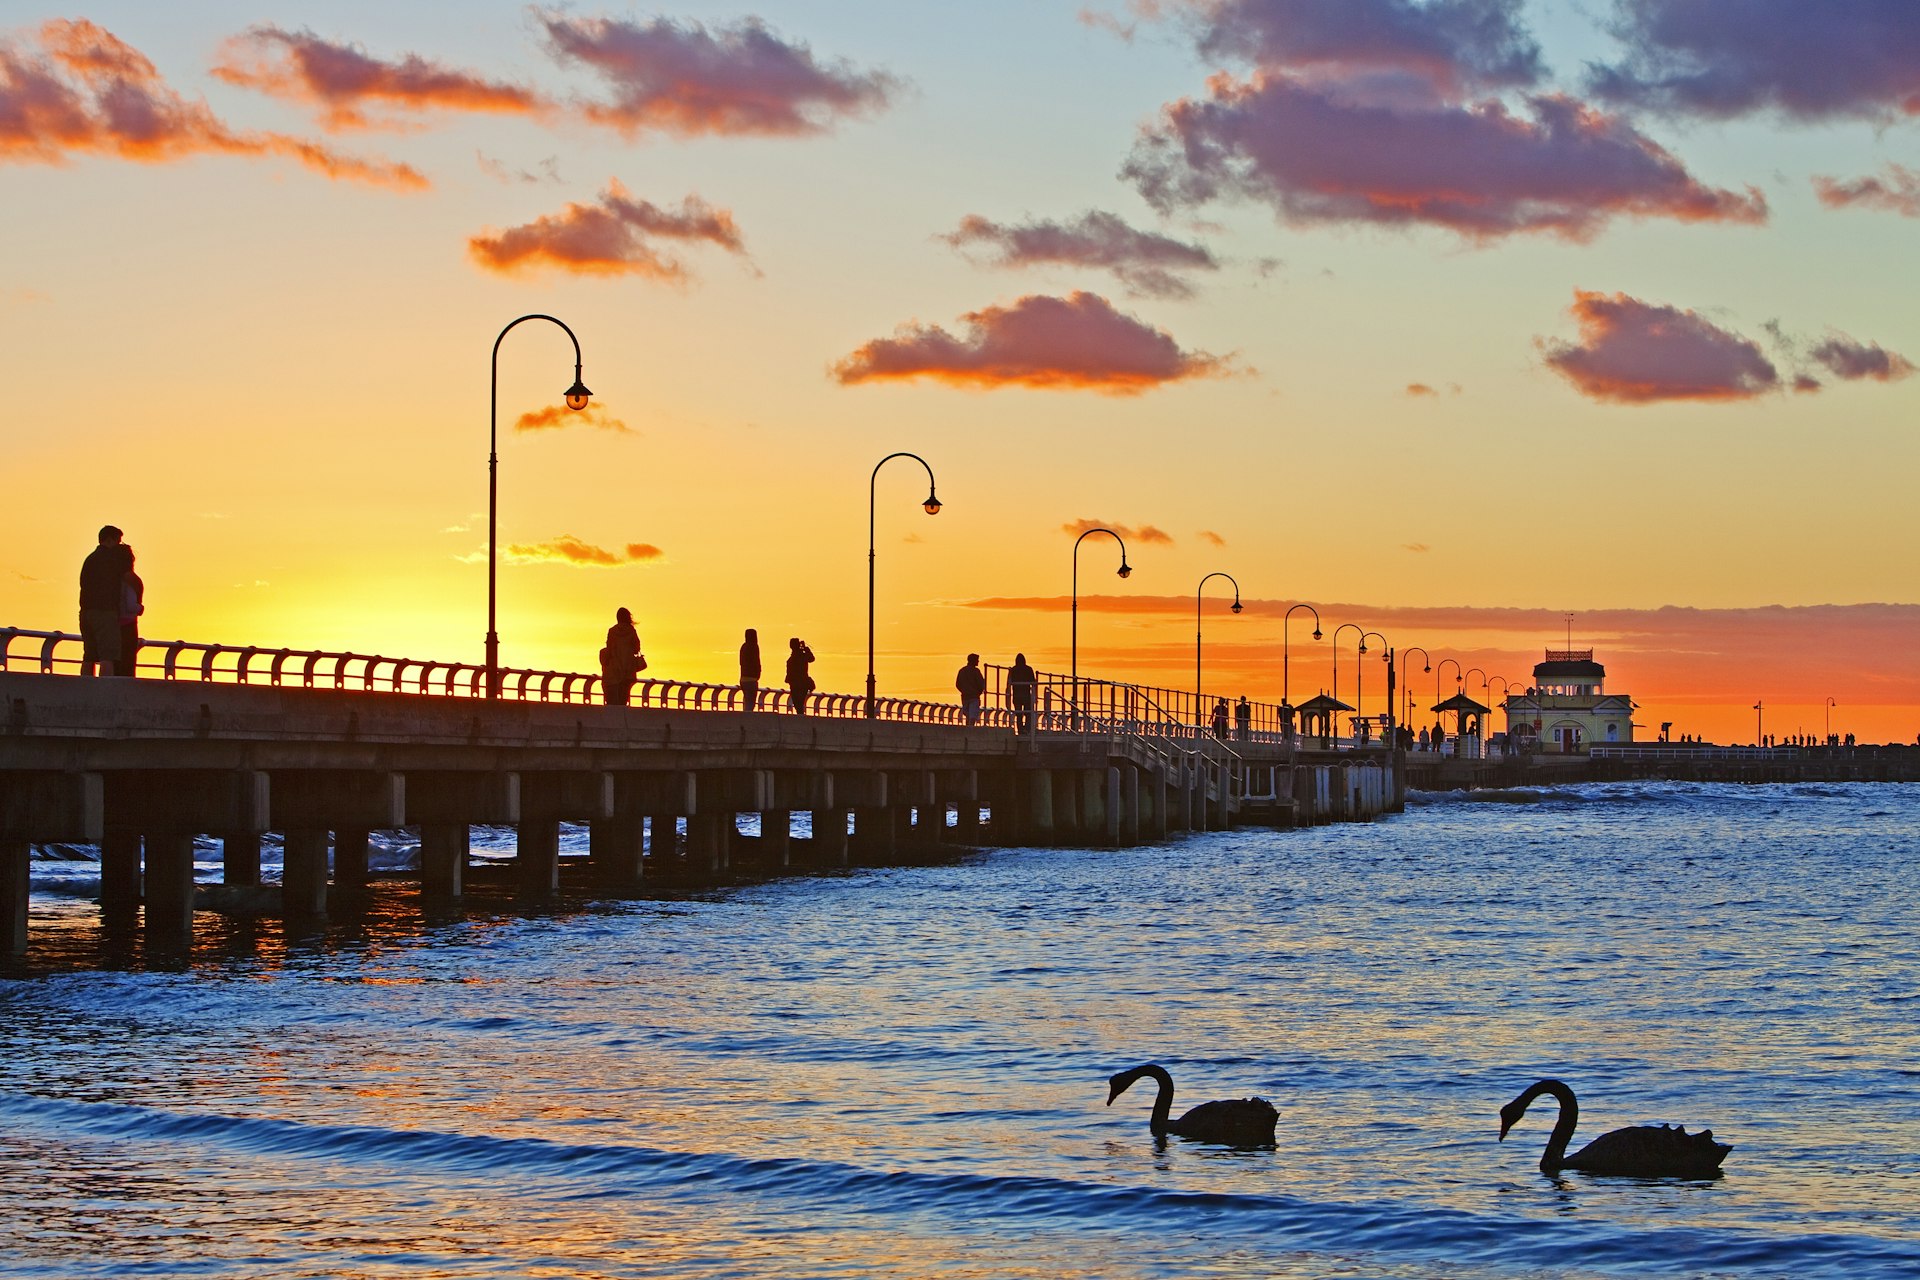 Sunset at St. Kilda Pier with swans.